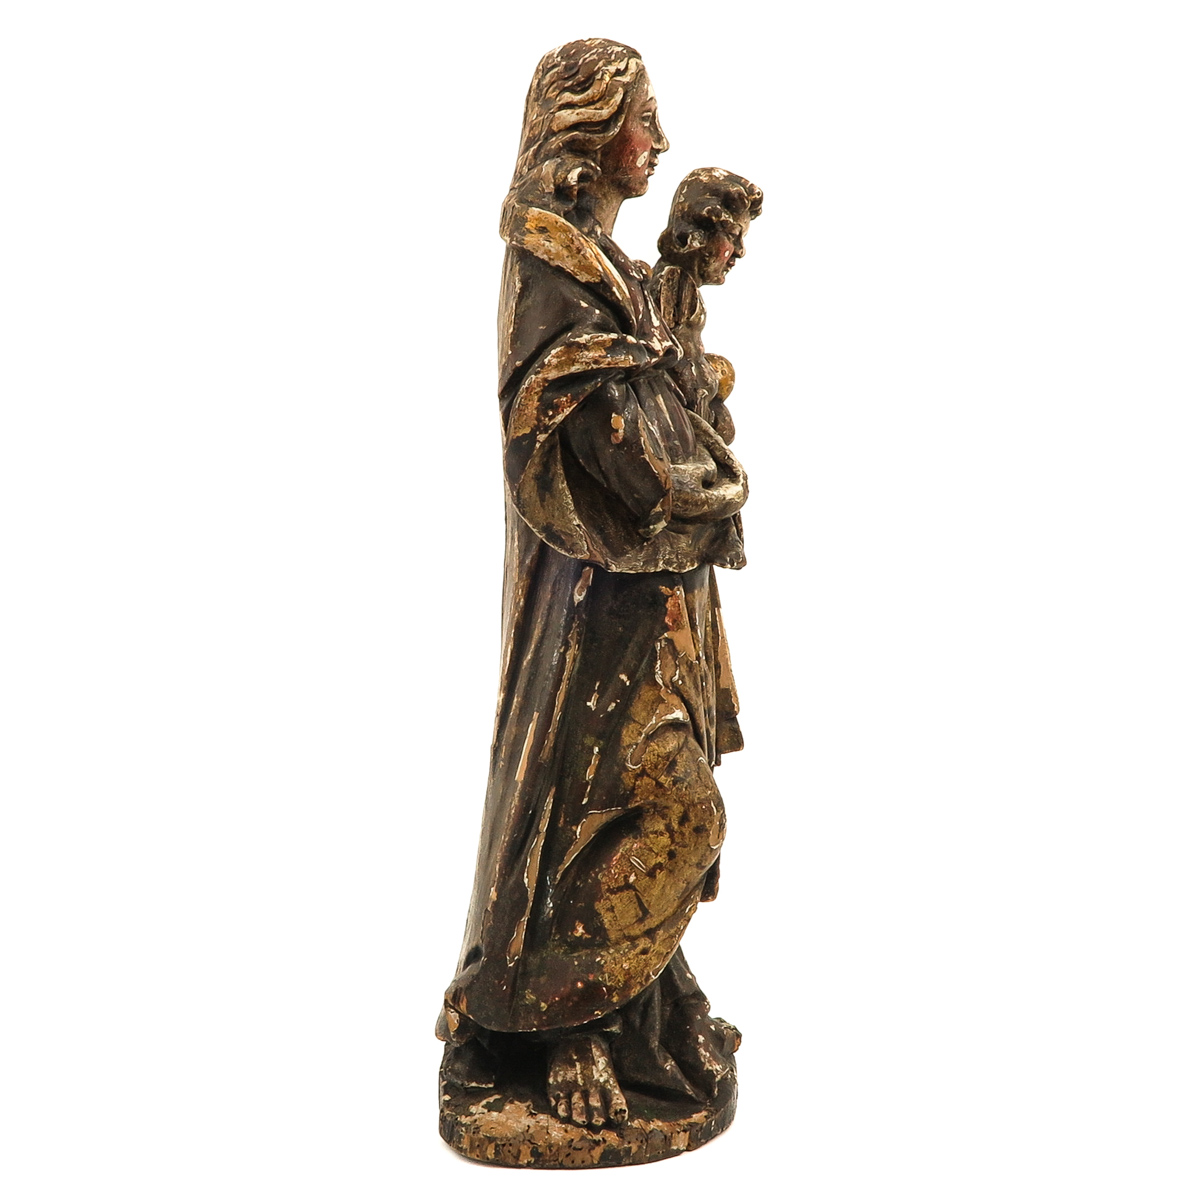 A Sculpture of Mary with Child - Image 4 of 9